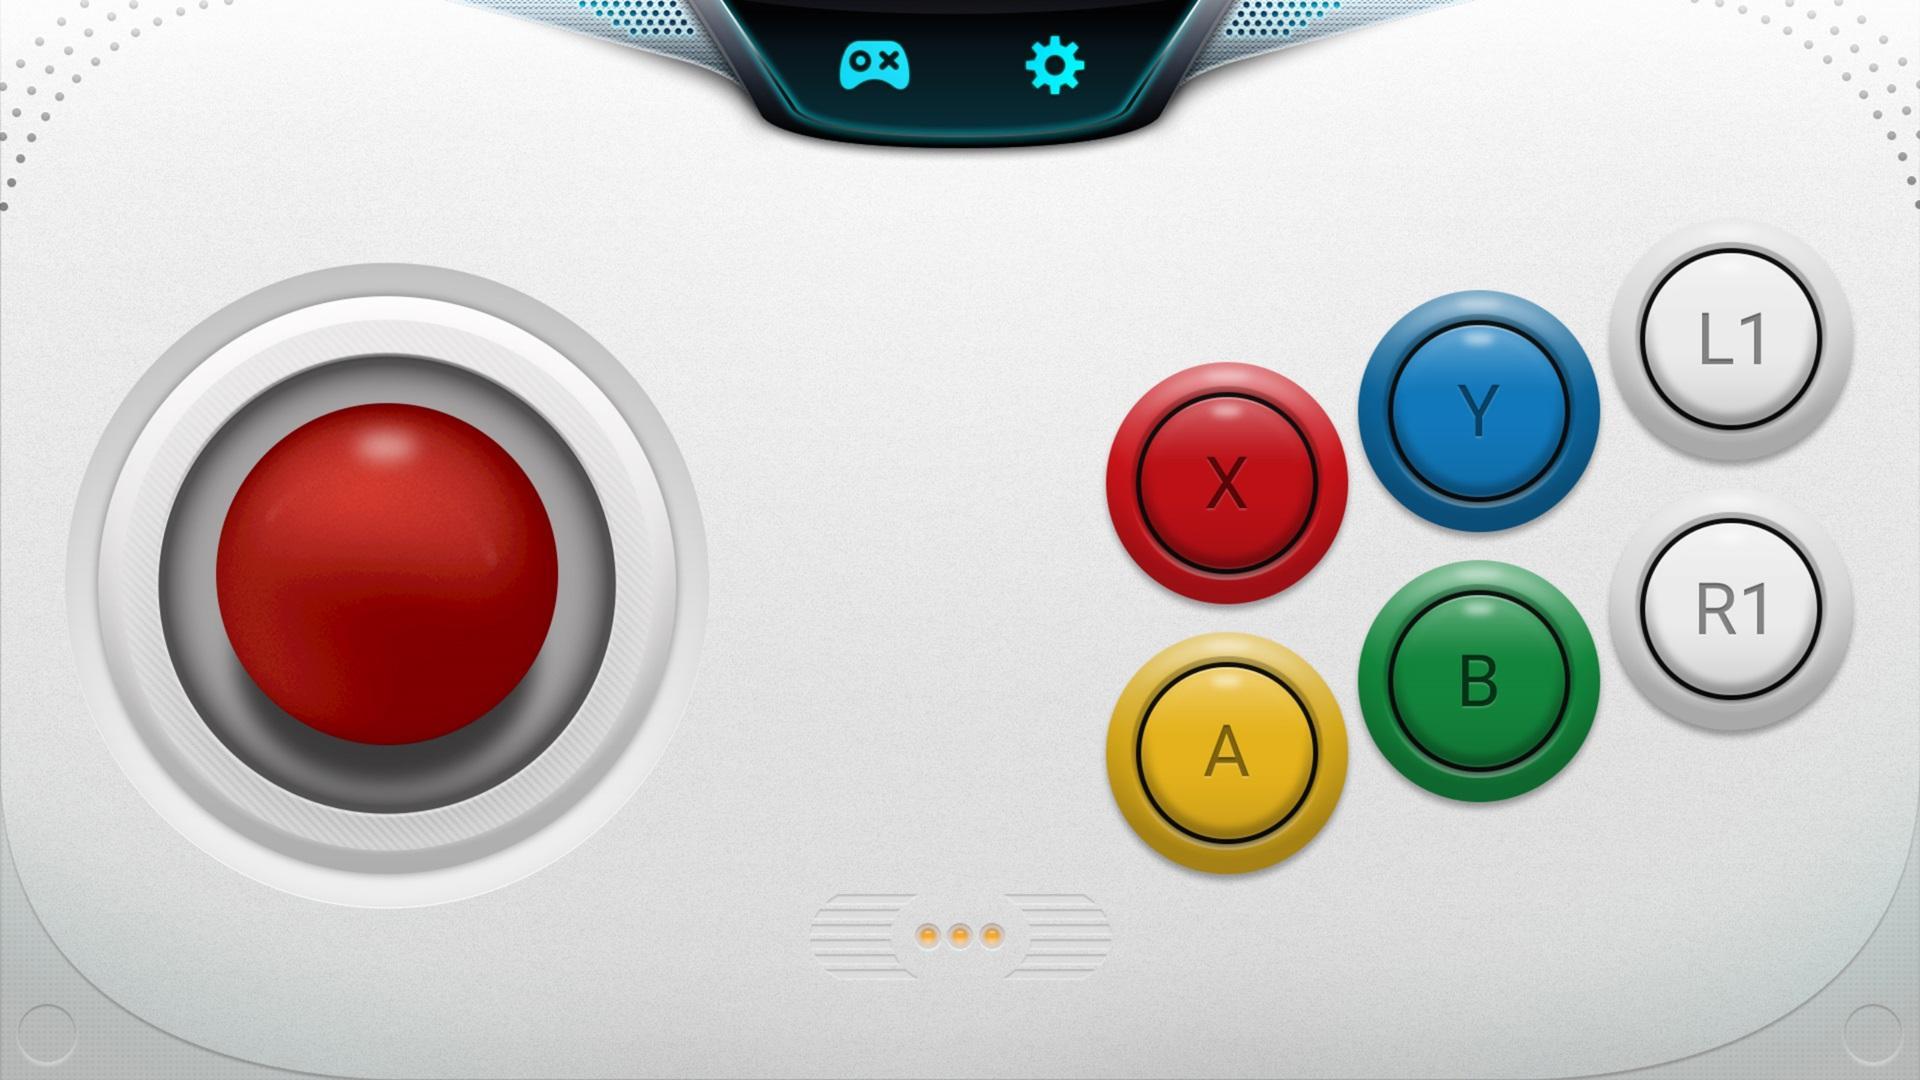 S Console Gamepad for Android - APK Download